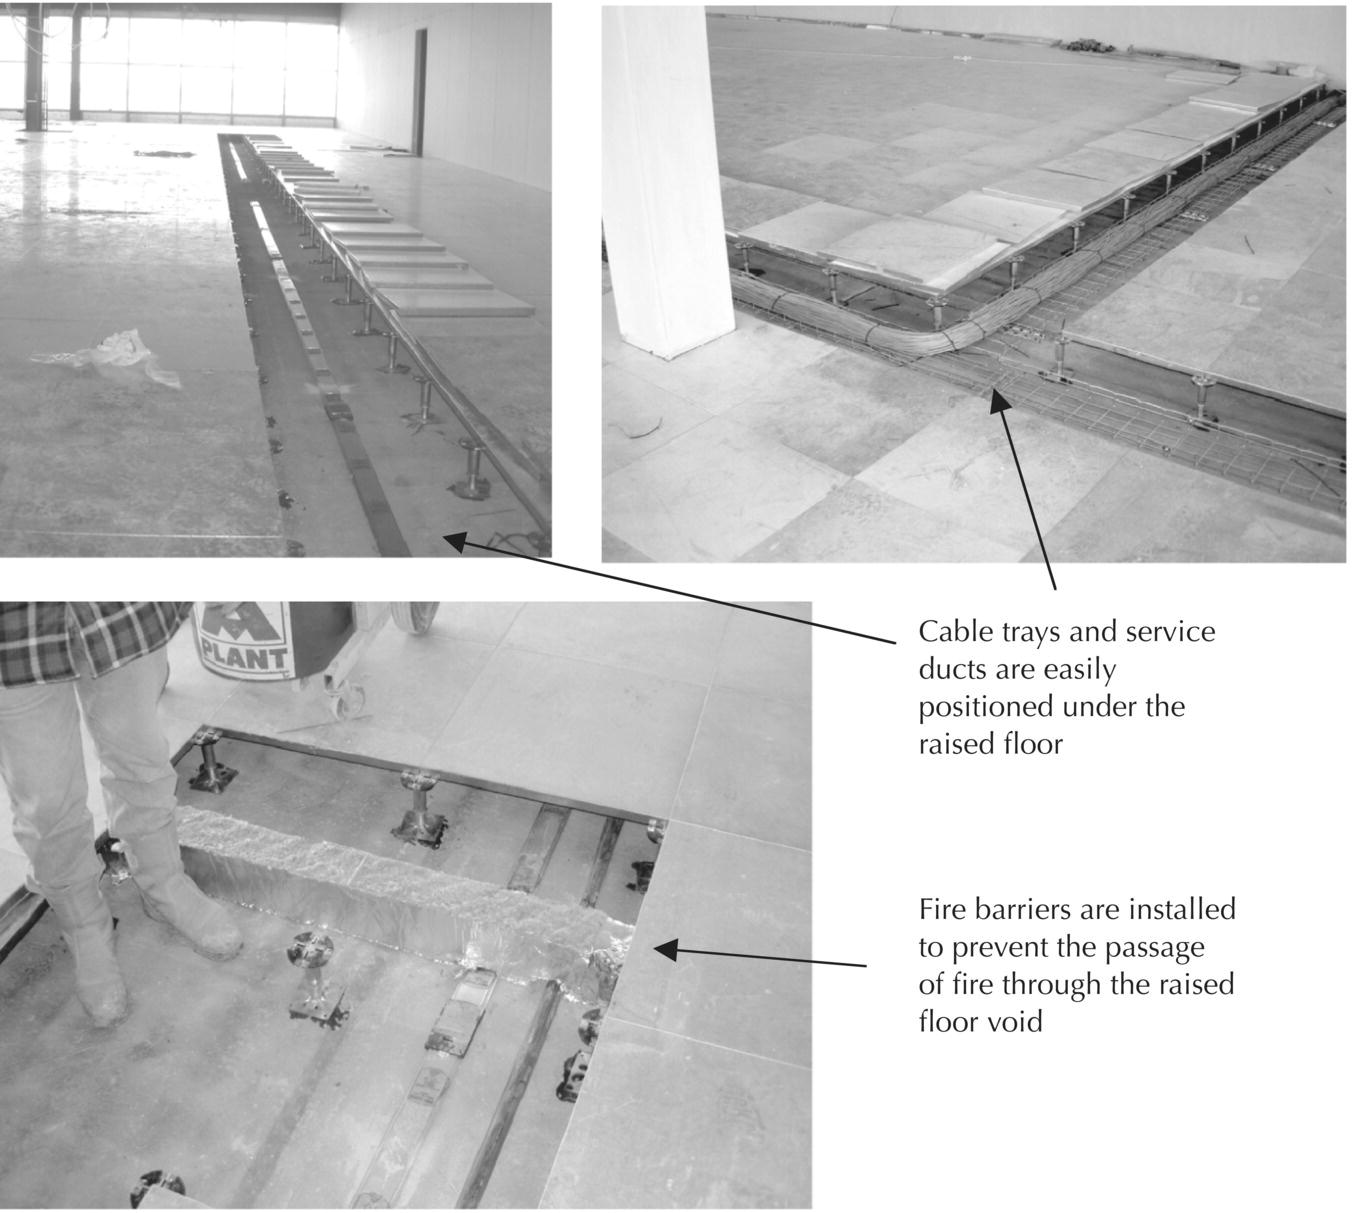 3 Photos displaying raised floors with cable trays and service ducts (top left and right) and fire barriers (bottom).